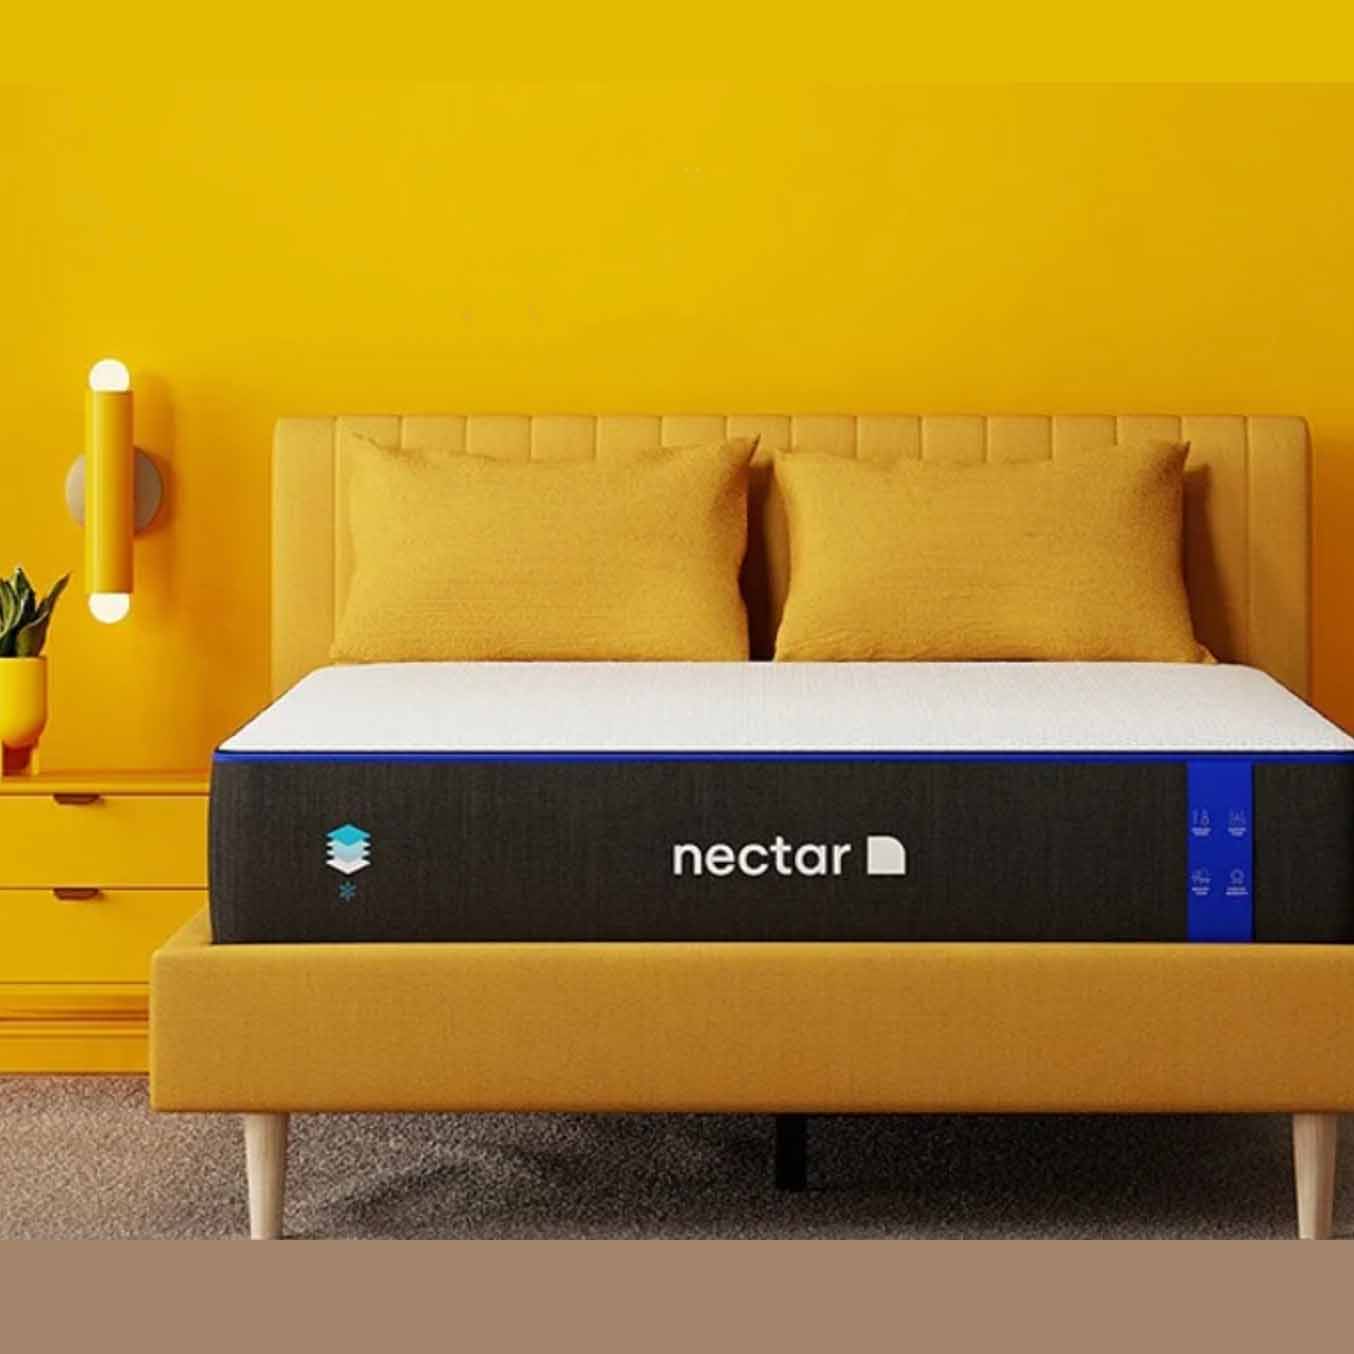 Nectar memory foam mattress on a yellow bed frame and yellow wall